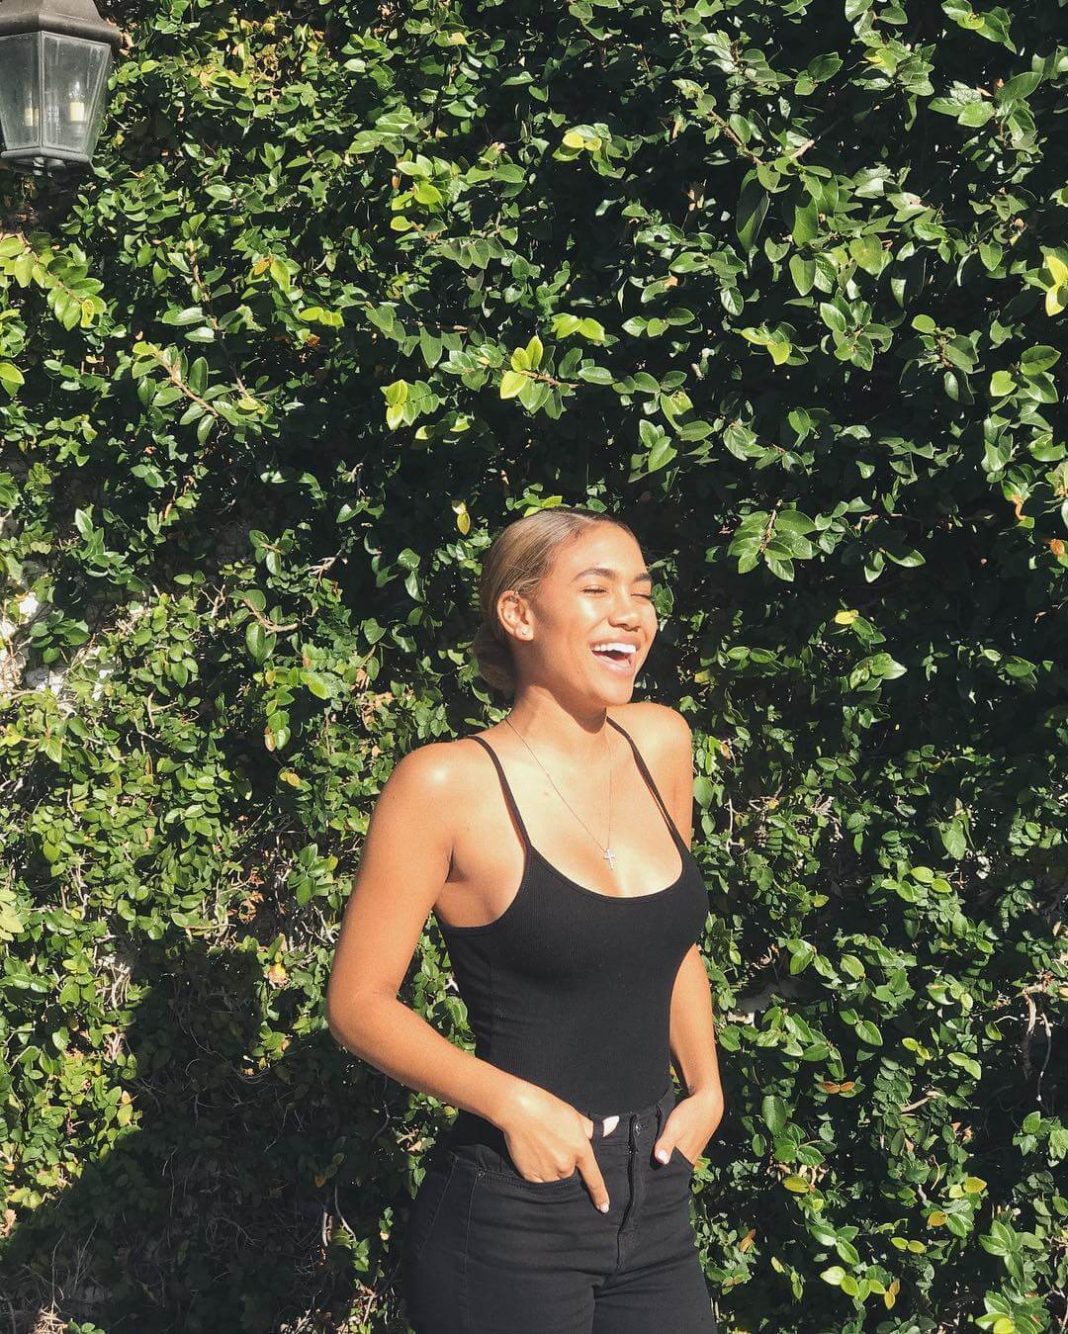 51 Paige Hurd Nude Pictures Which Makes Her An Enigmatic Glamor Quotient 3